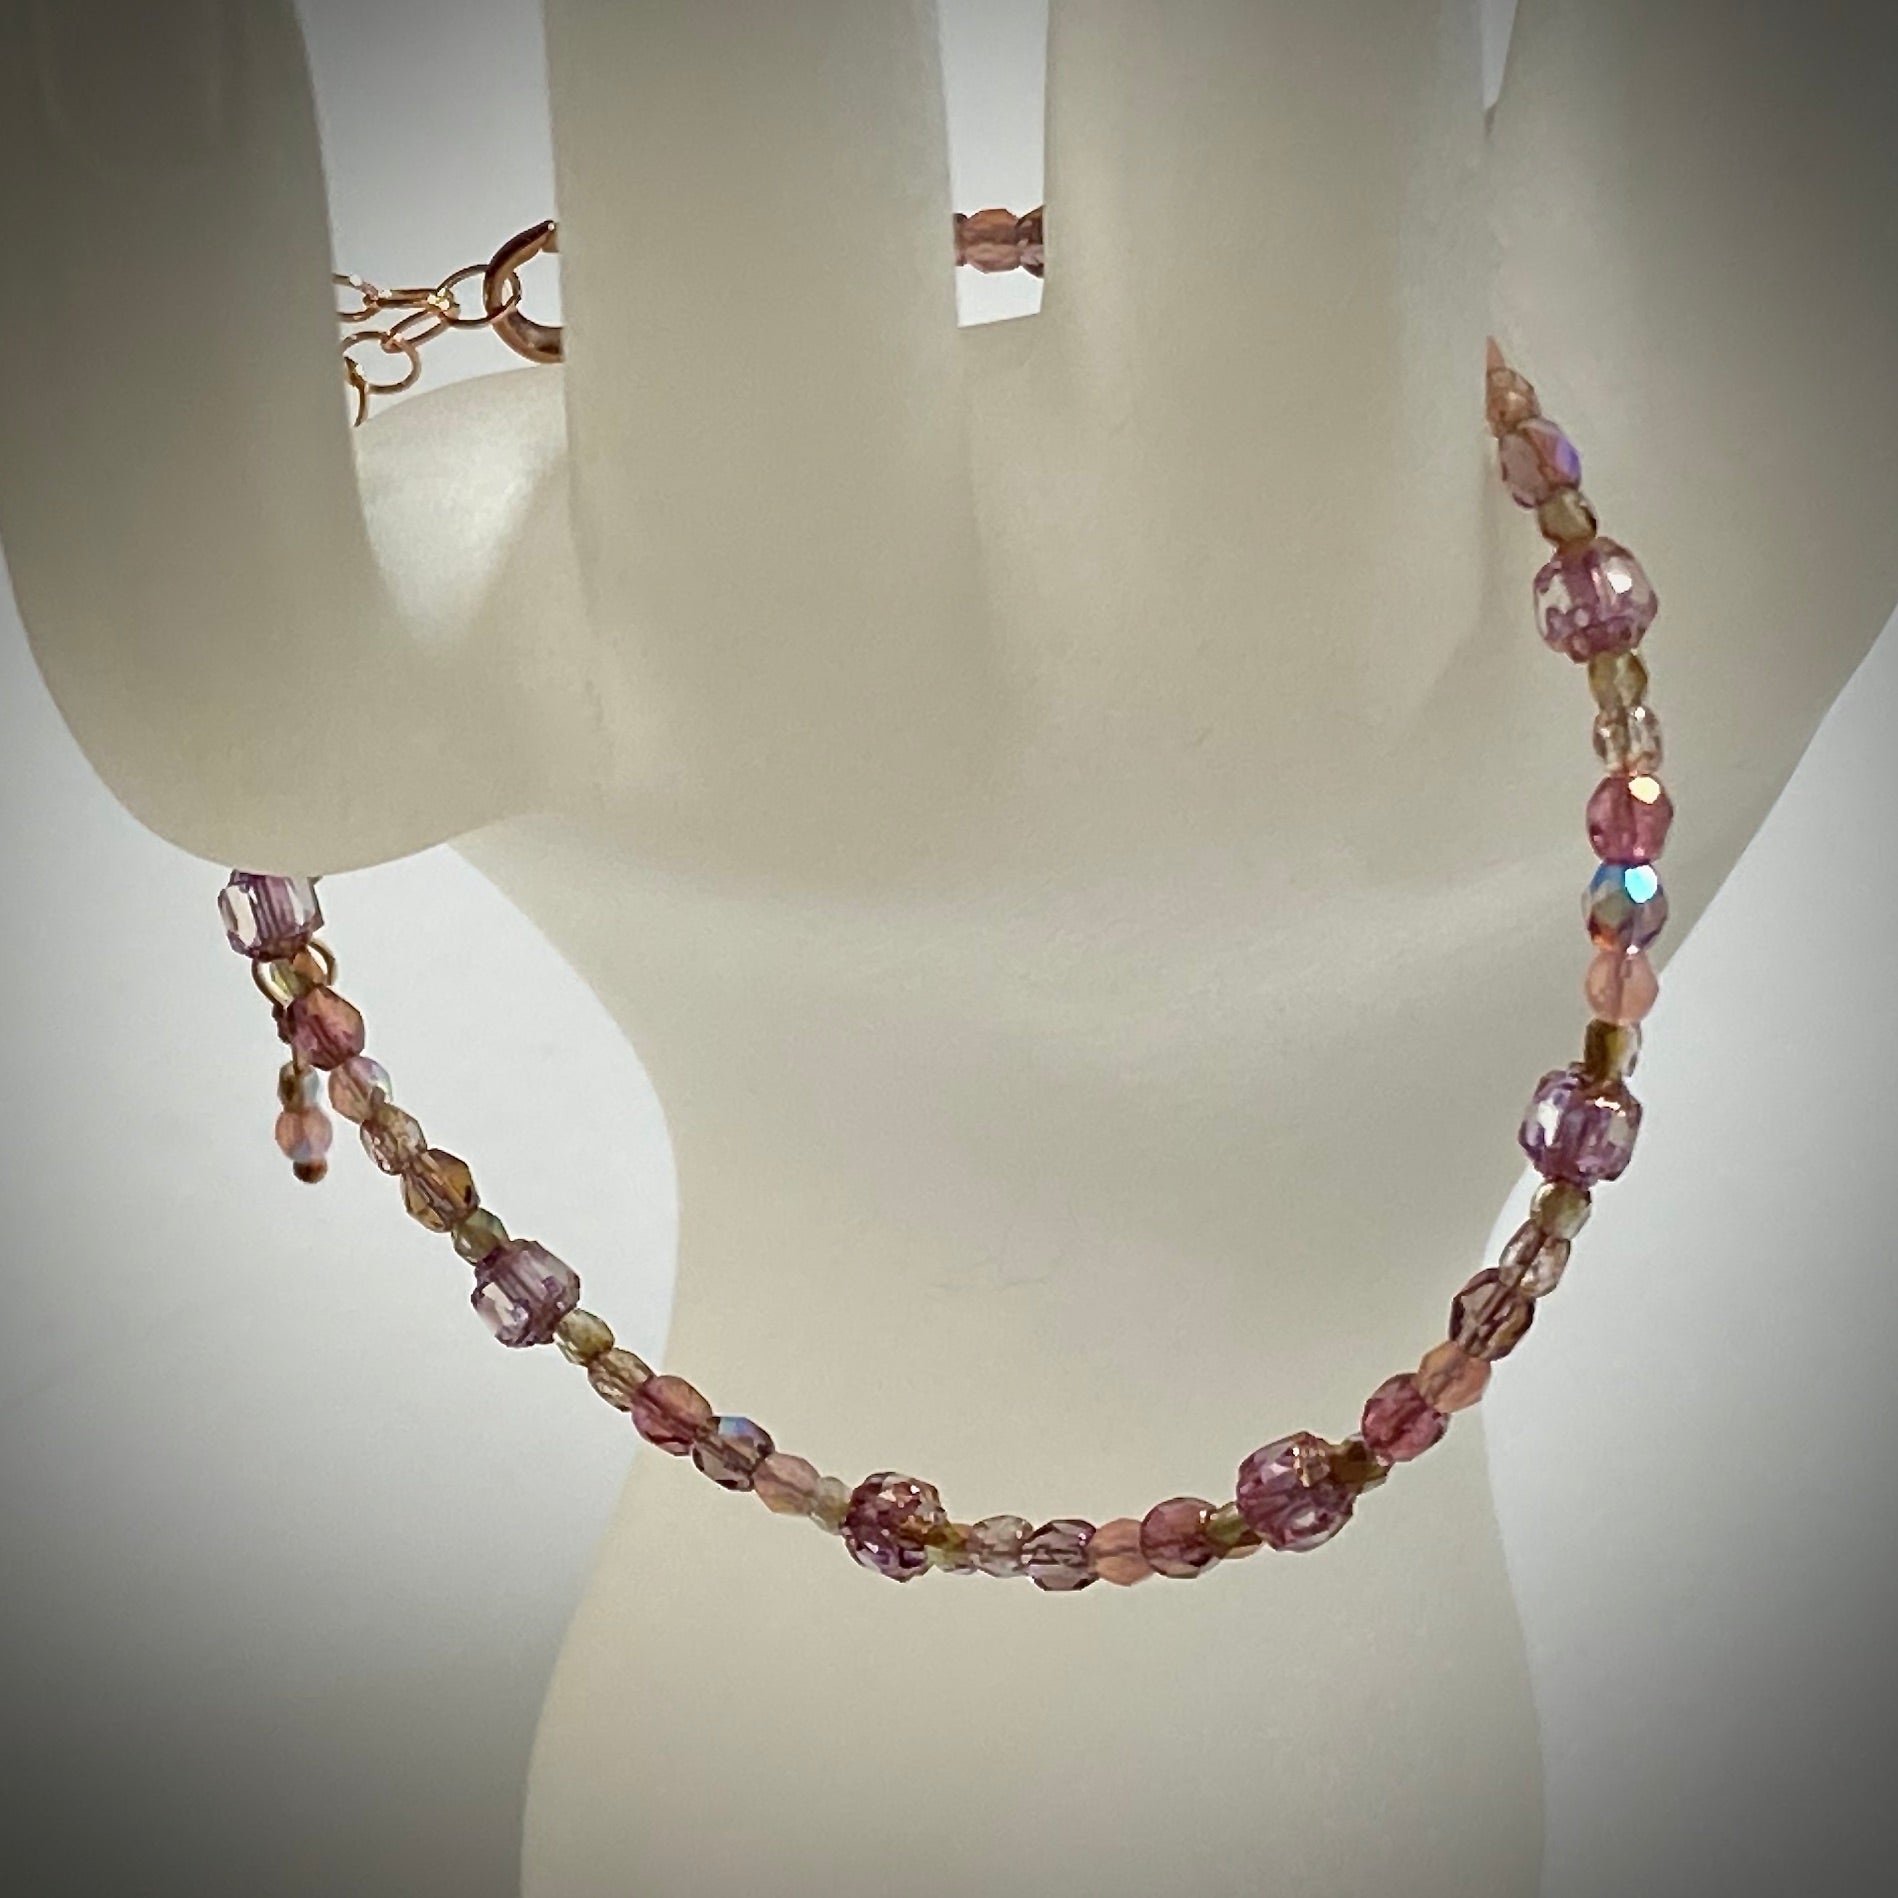 "Burnished Rose" Bracelet from Arpaia Brilliant Lights Glass Collection